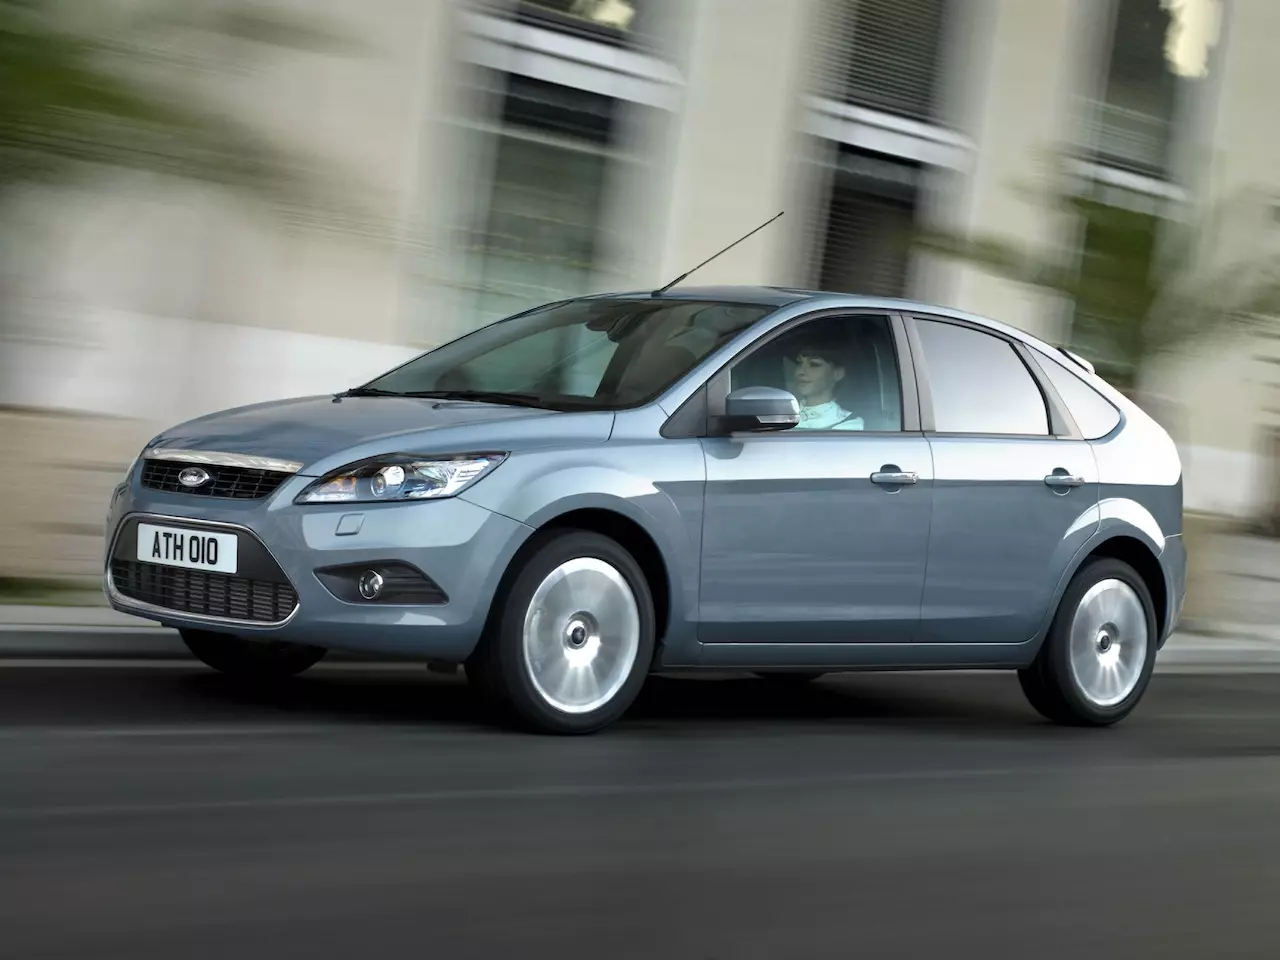 Ford Focus Mk2 common problems (2005 - 2011)